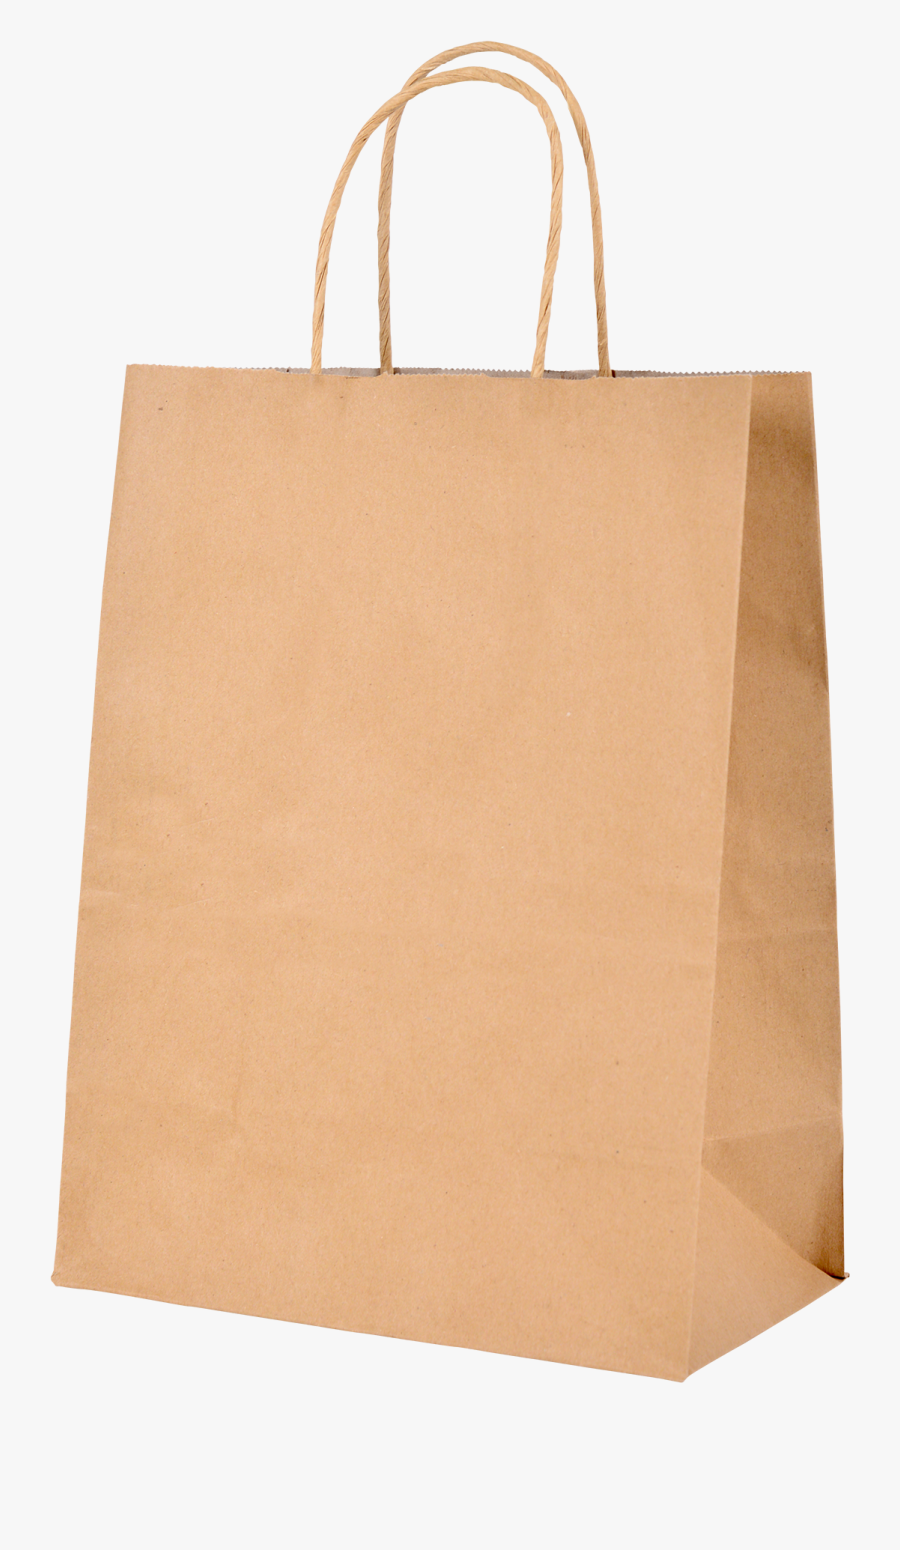 Clip Art Printed Easy Cheap And - Craft Paper Bag Png, Transparent Clipart